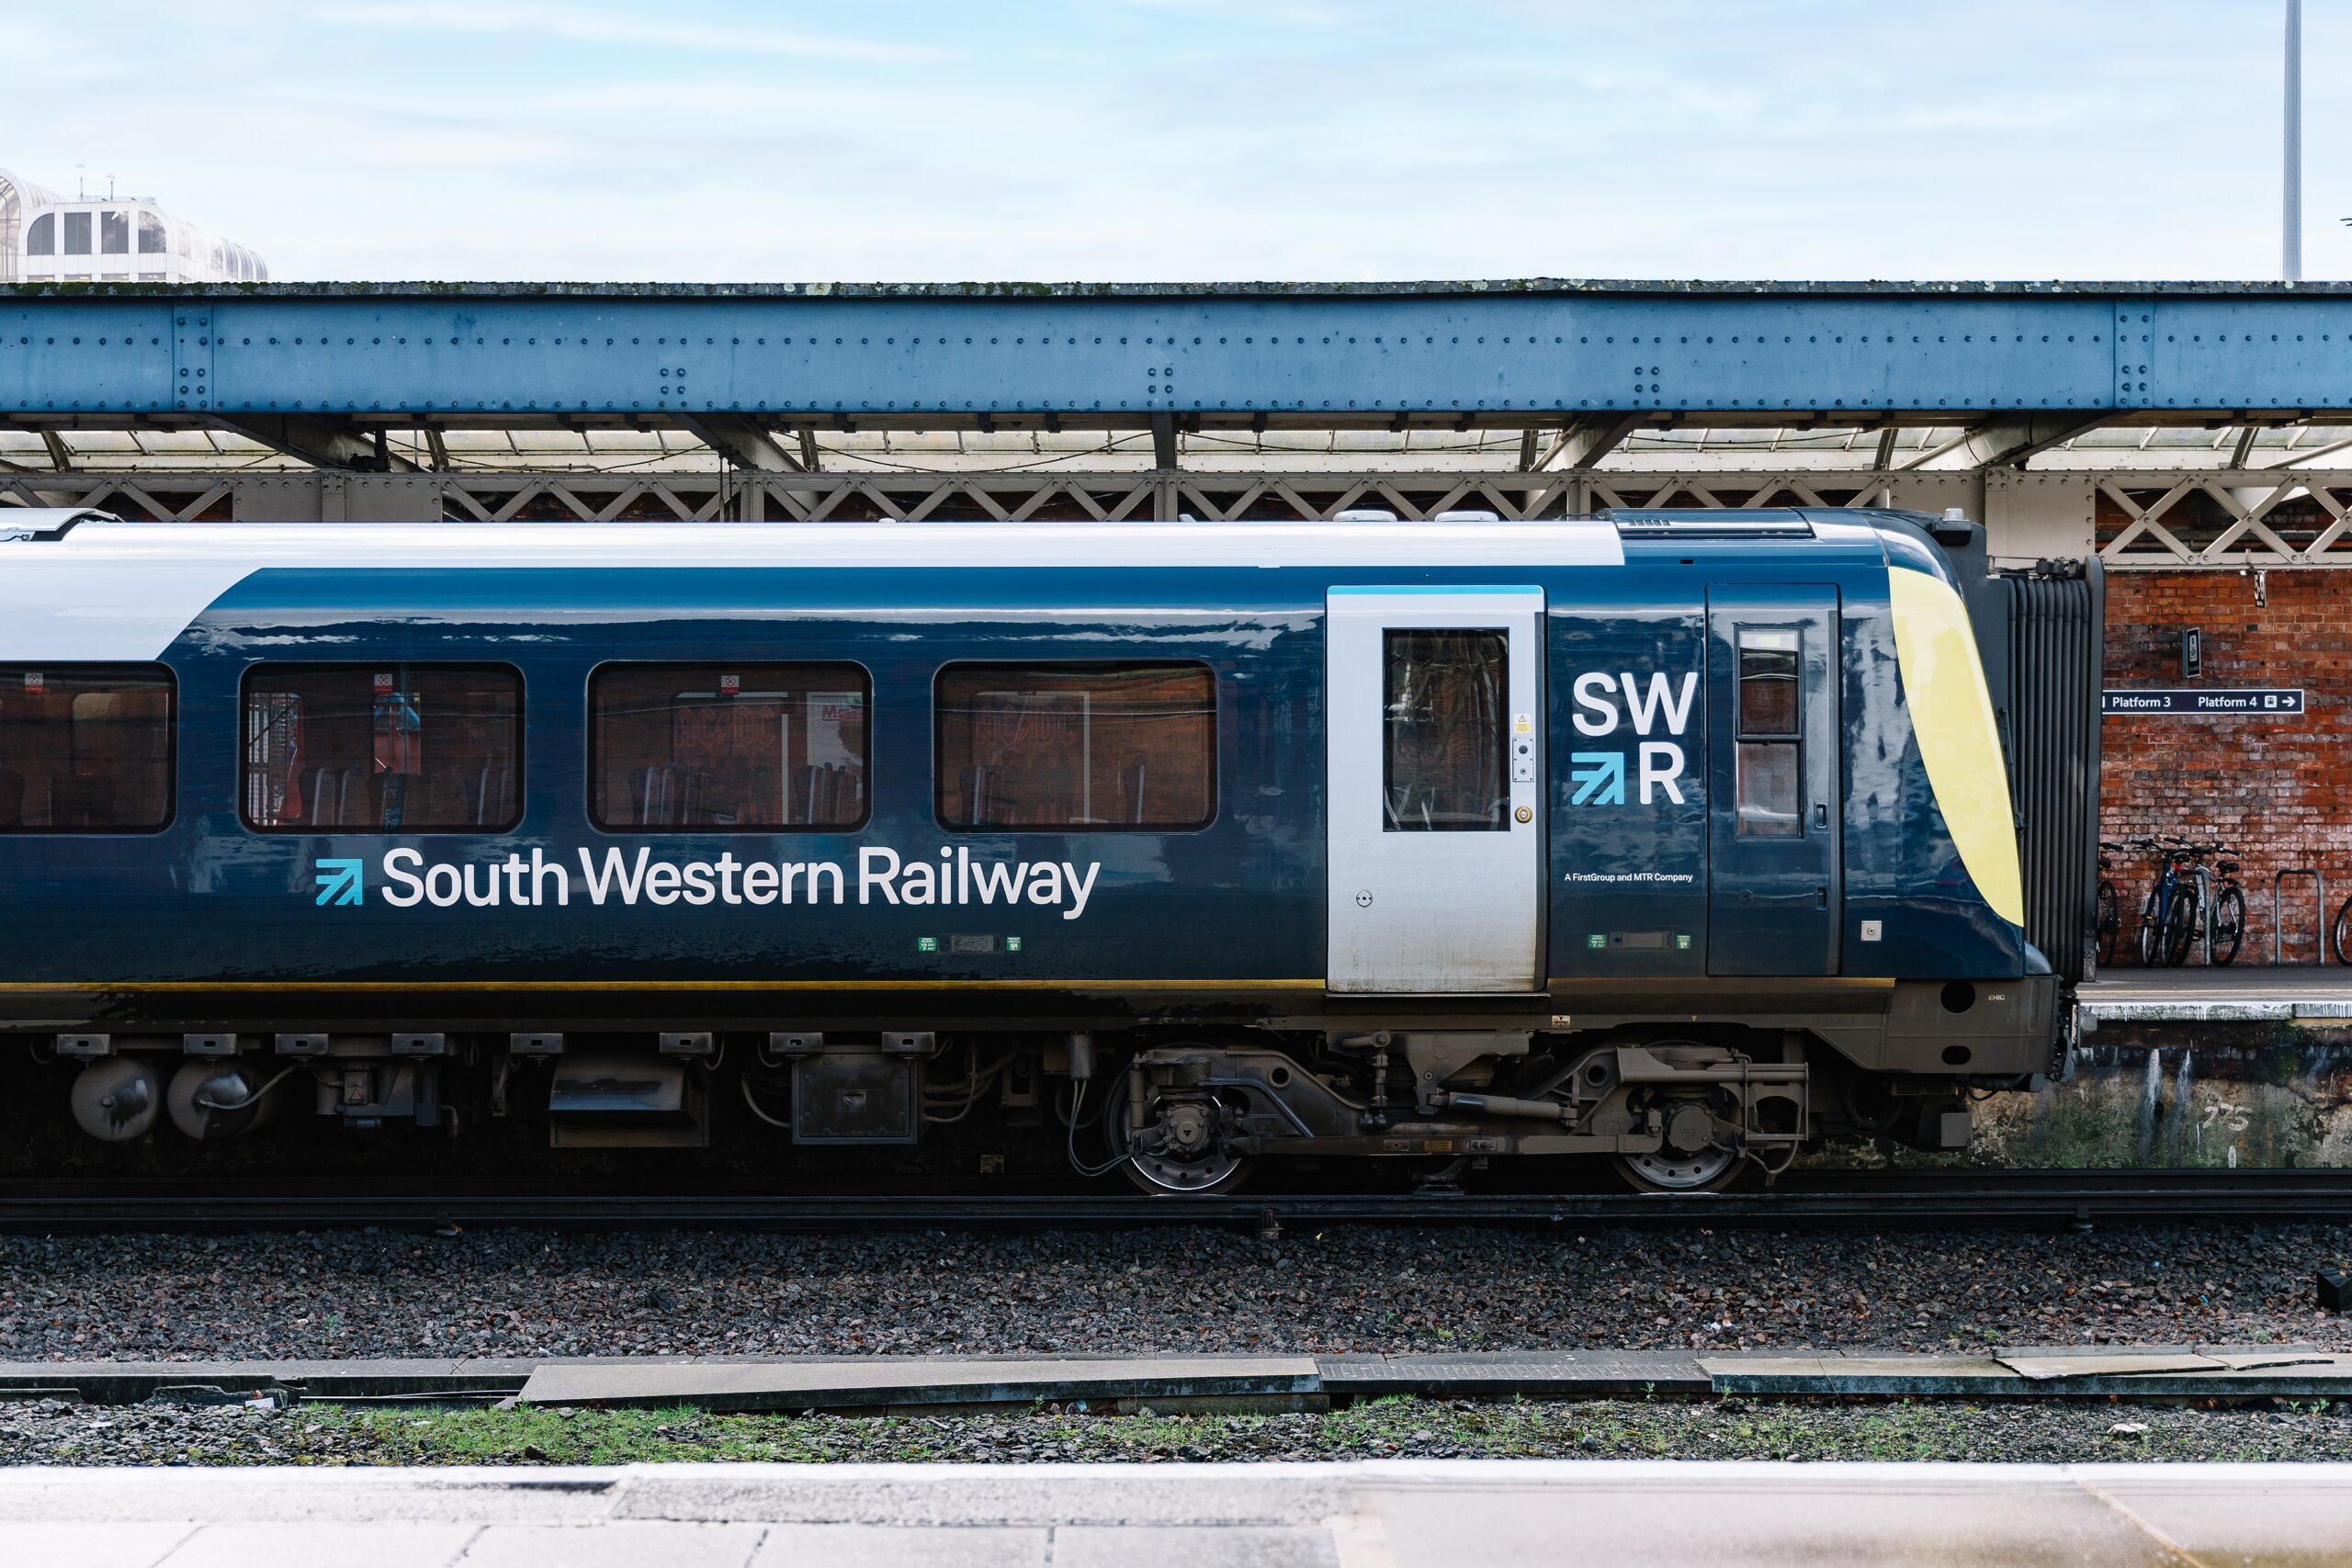 South Western Railway reminds customers of industrial action between Monday 7 and Saturday 12 August